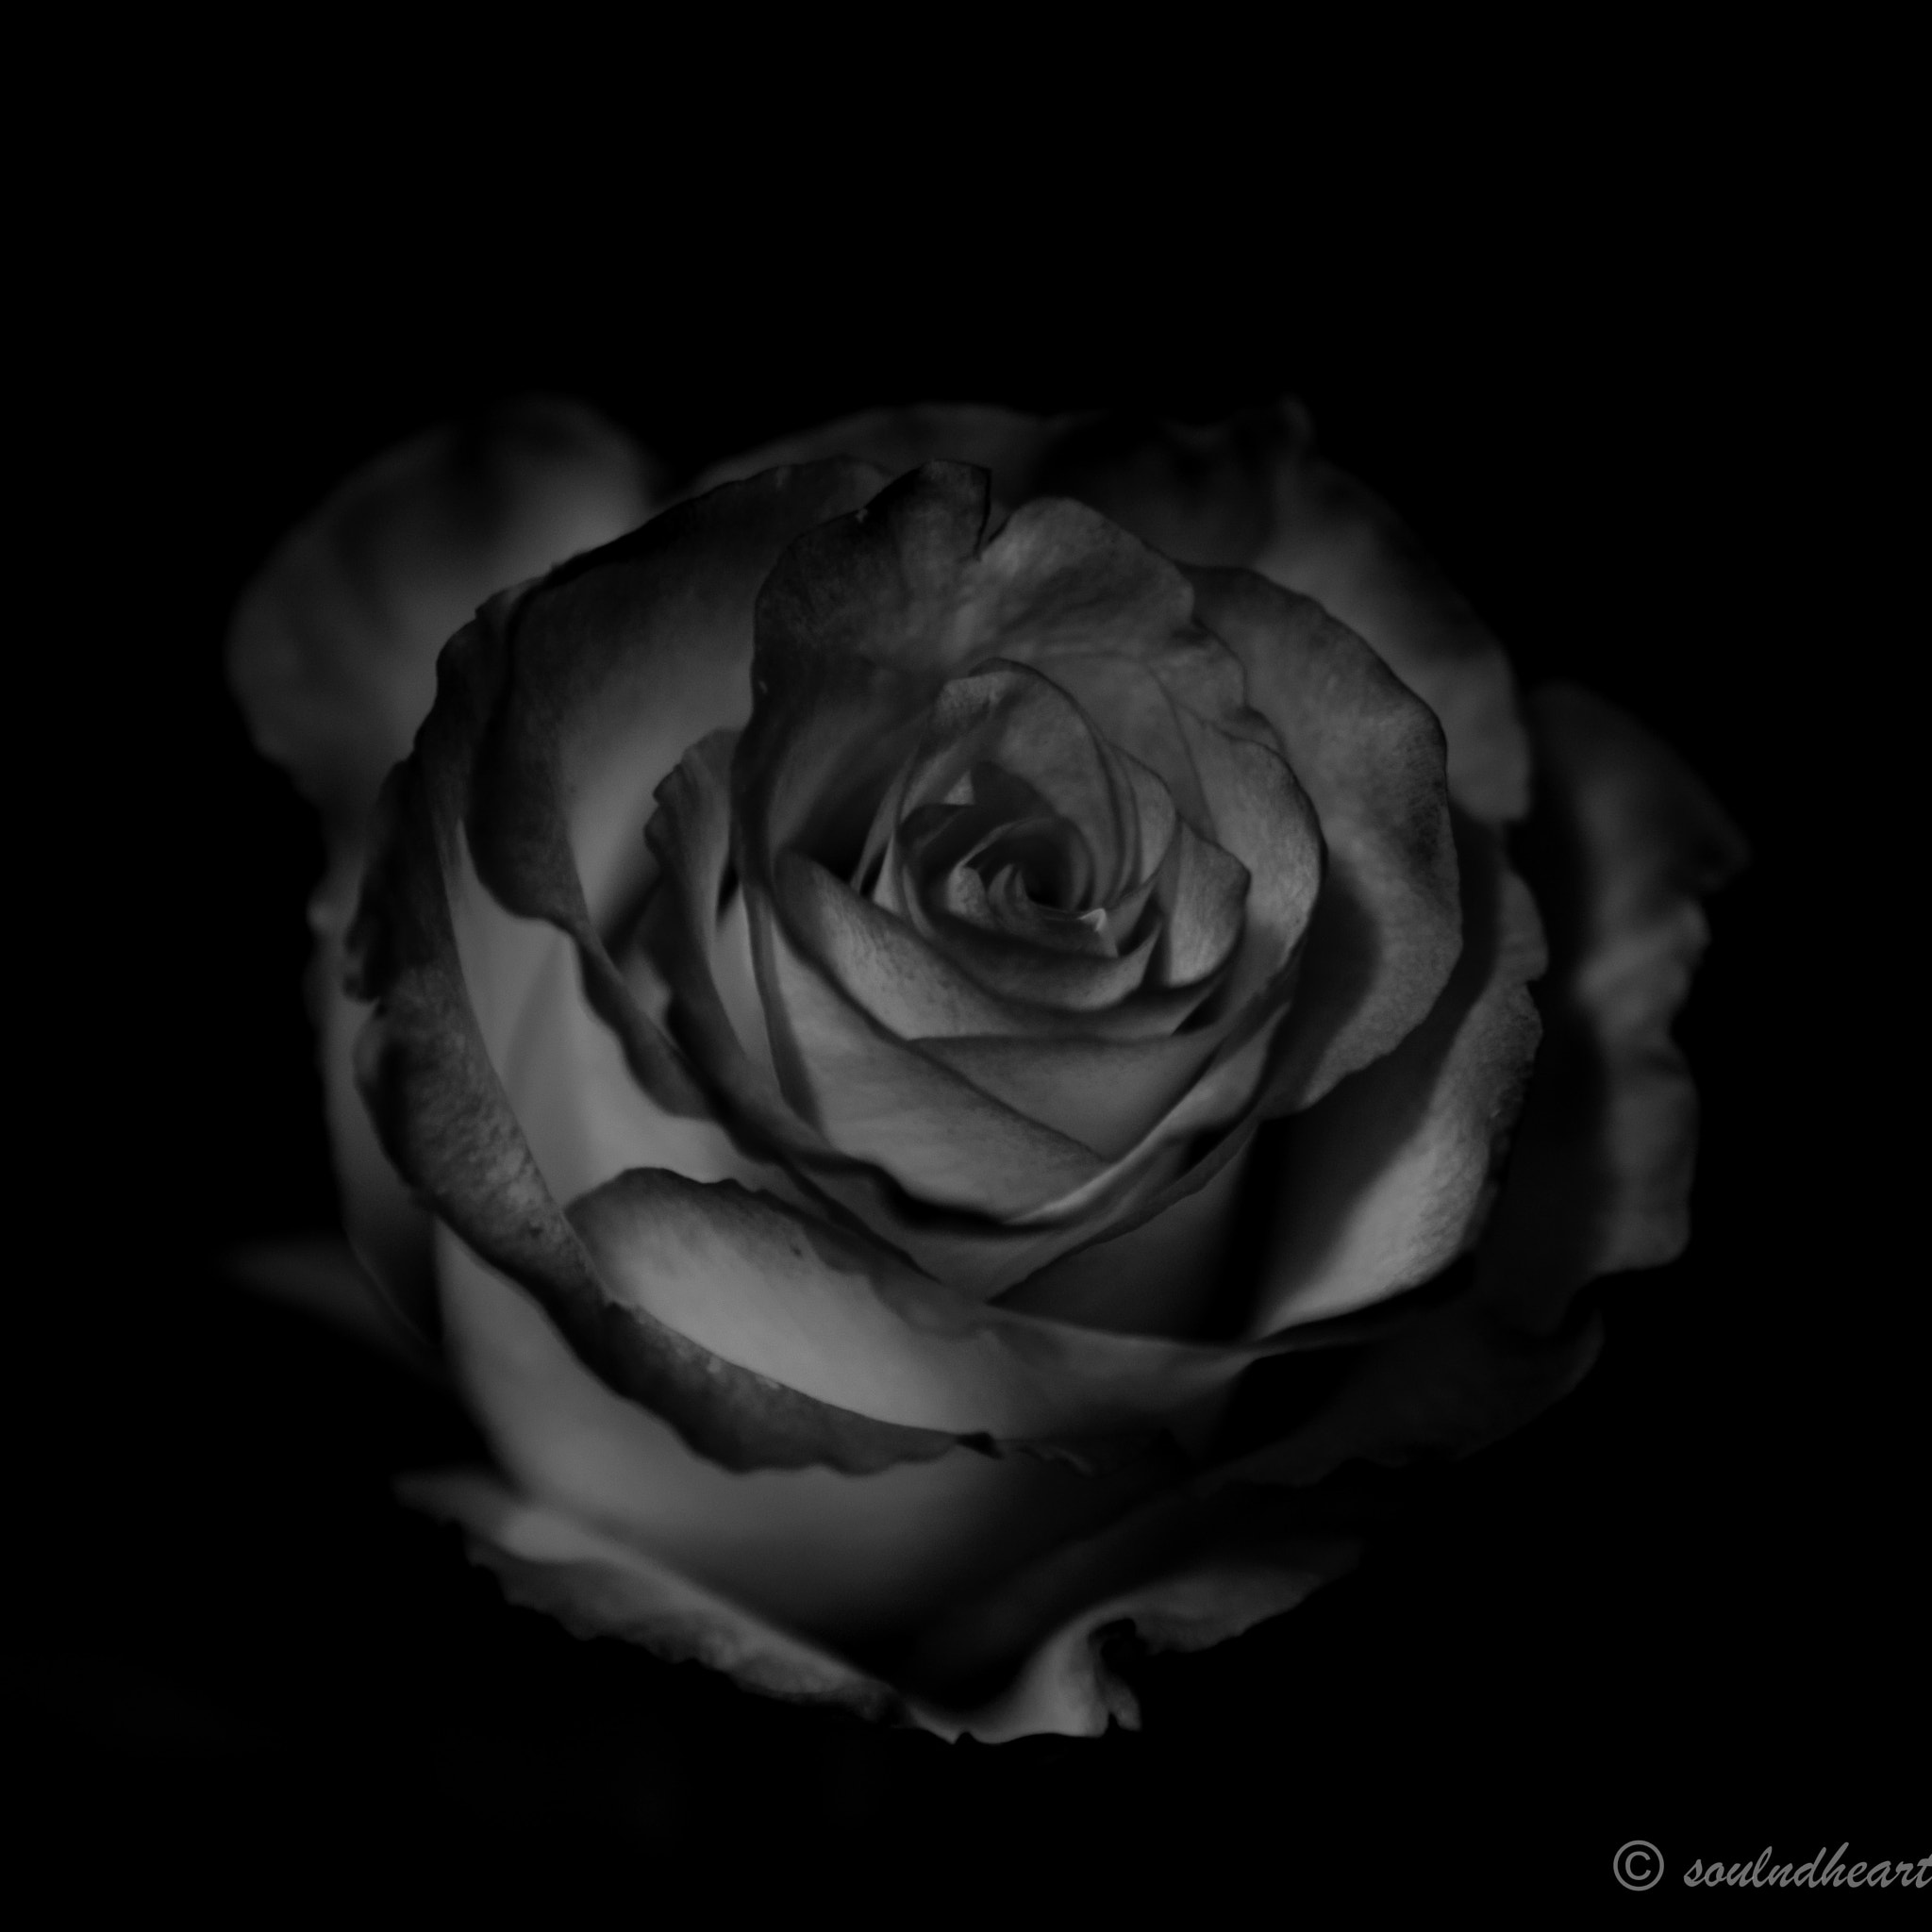 Sony a7 II sample photo. The beauty of a rose photography